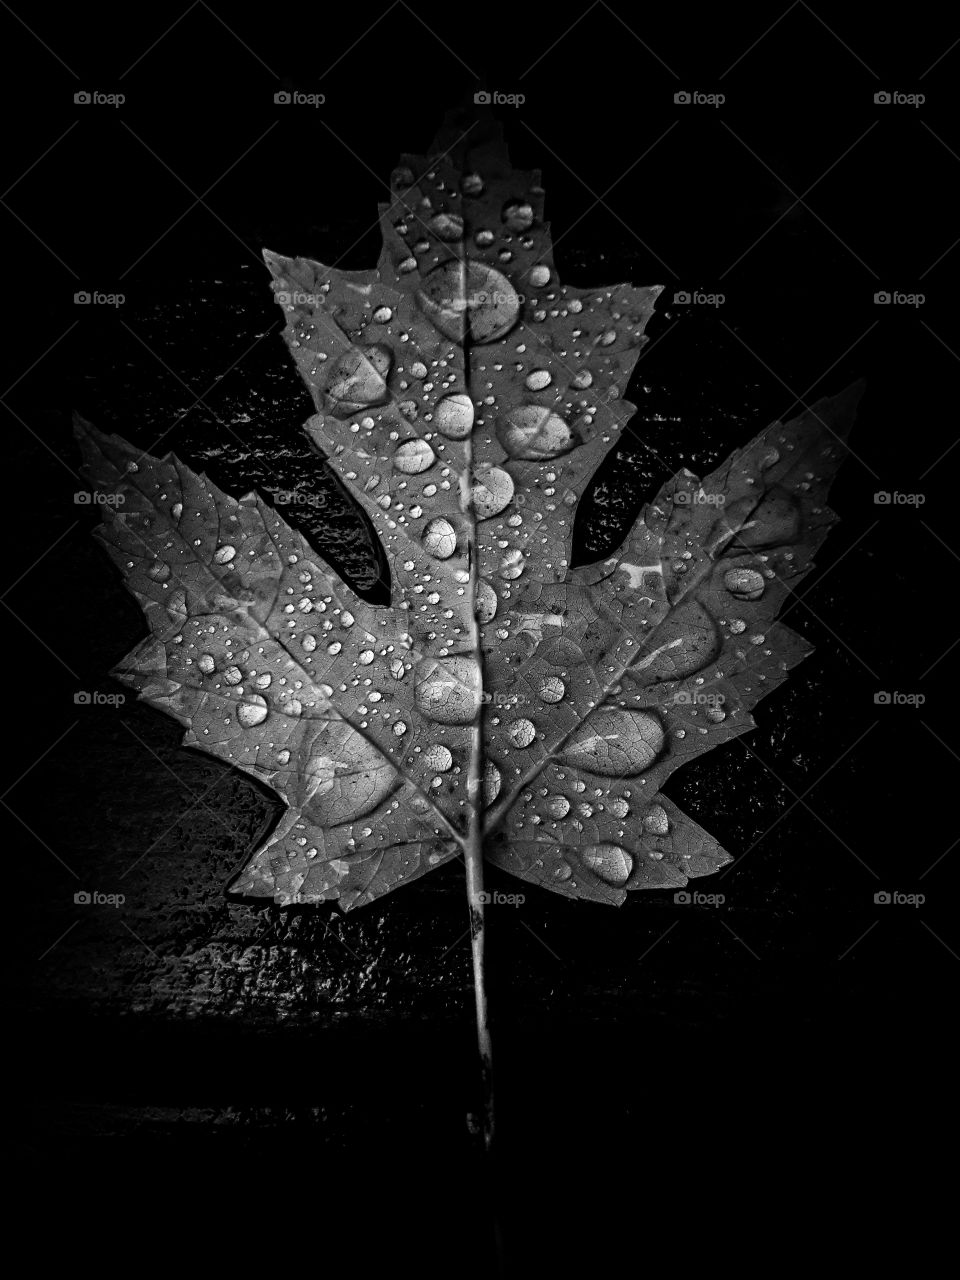 black and white photograph of raindrops collected on a maple leaf.